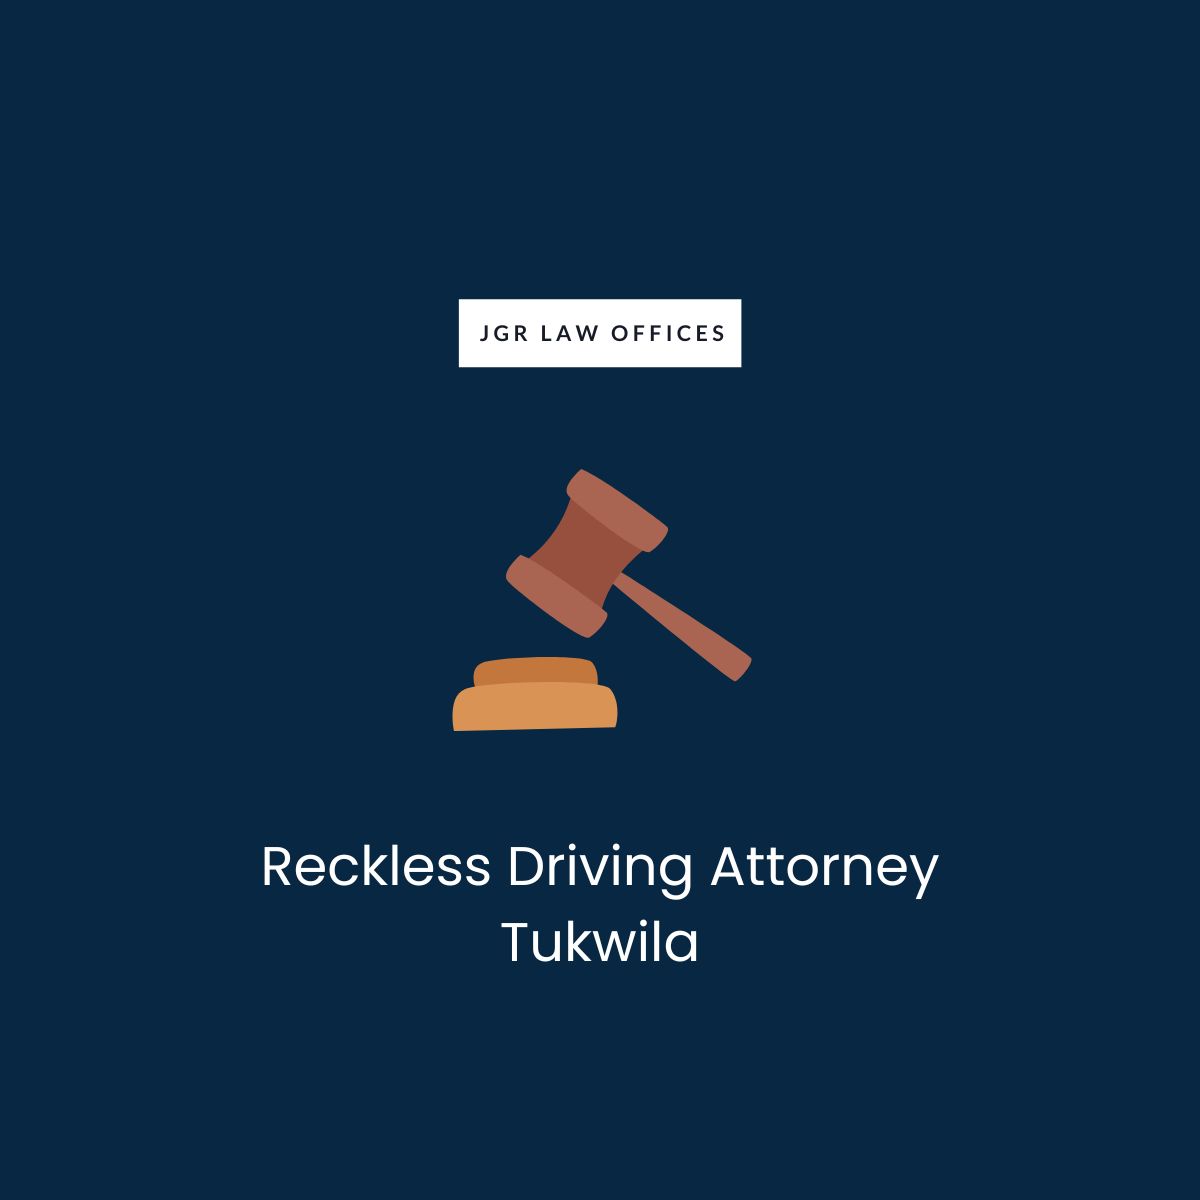 Reckless Driving Lawyer Tukwila Reckless Driving Reckless Driving